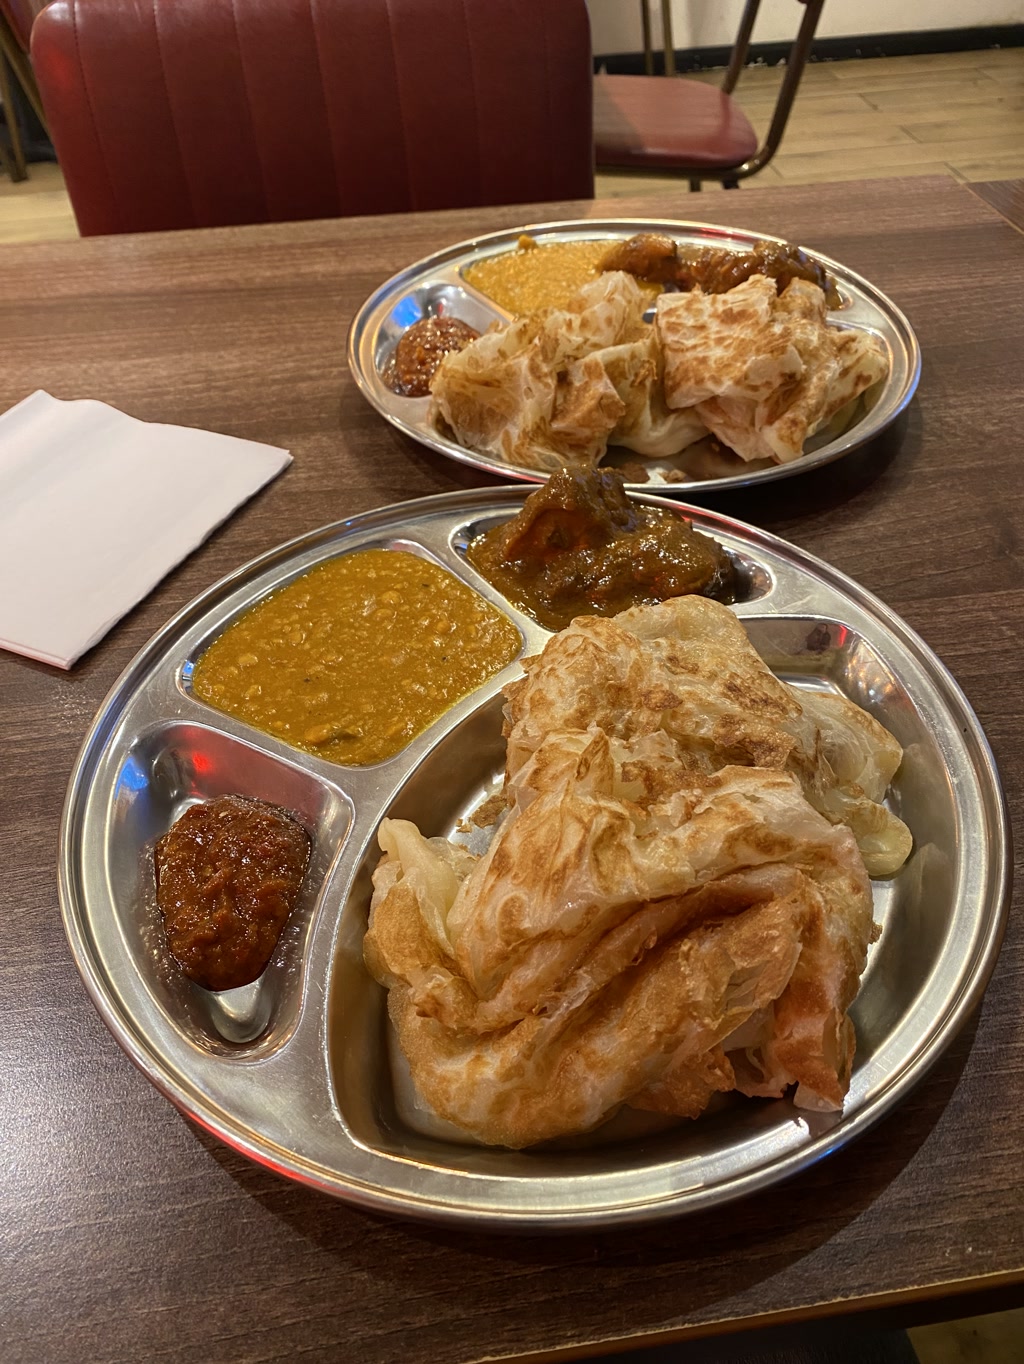 A meal consisting of flaky, layered flatbread served on a metal tray alongside various types of curry and condiments. The flatbread appears golden brown and crispy, likely a type of Roti or Paratha. The curries are served in compartments on a second metal tray and range in color from yellow to dark brown, suggestive of different spices and ingredients. Additionally, there are small portions of condiments that might be spicy sambal or chutney, complimenting the main dish. The setting looks like a simple dining area with a wooden table and a red vinyl upholstered bench in the background.